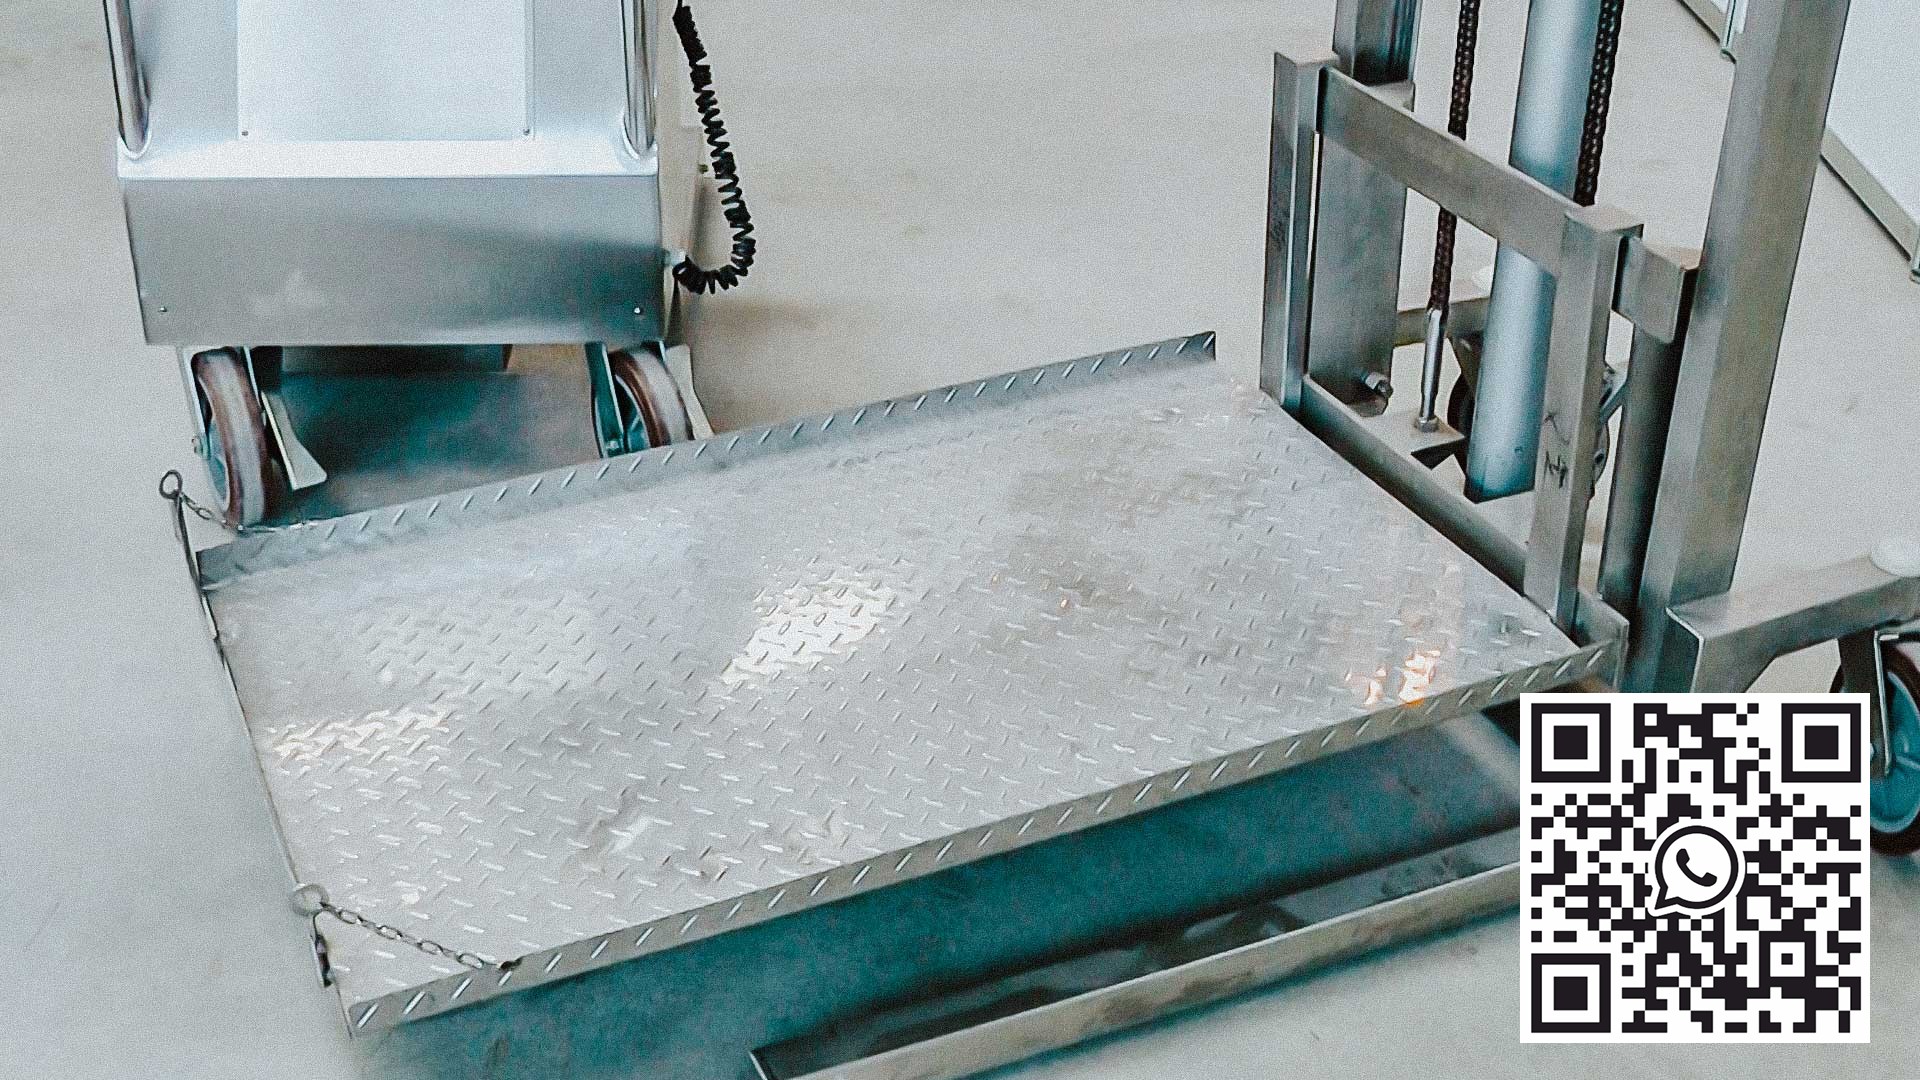 Automatic pick-up for powder containers in pharmaceutical factory